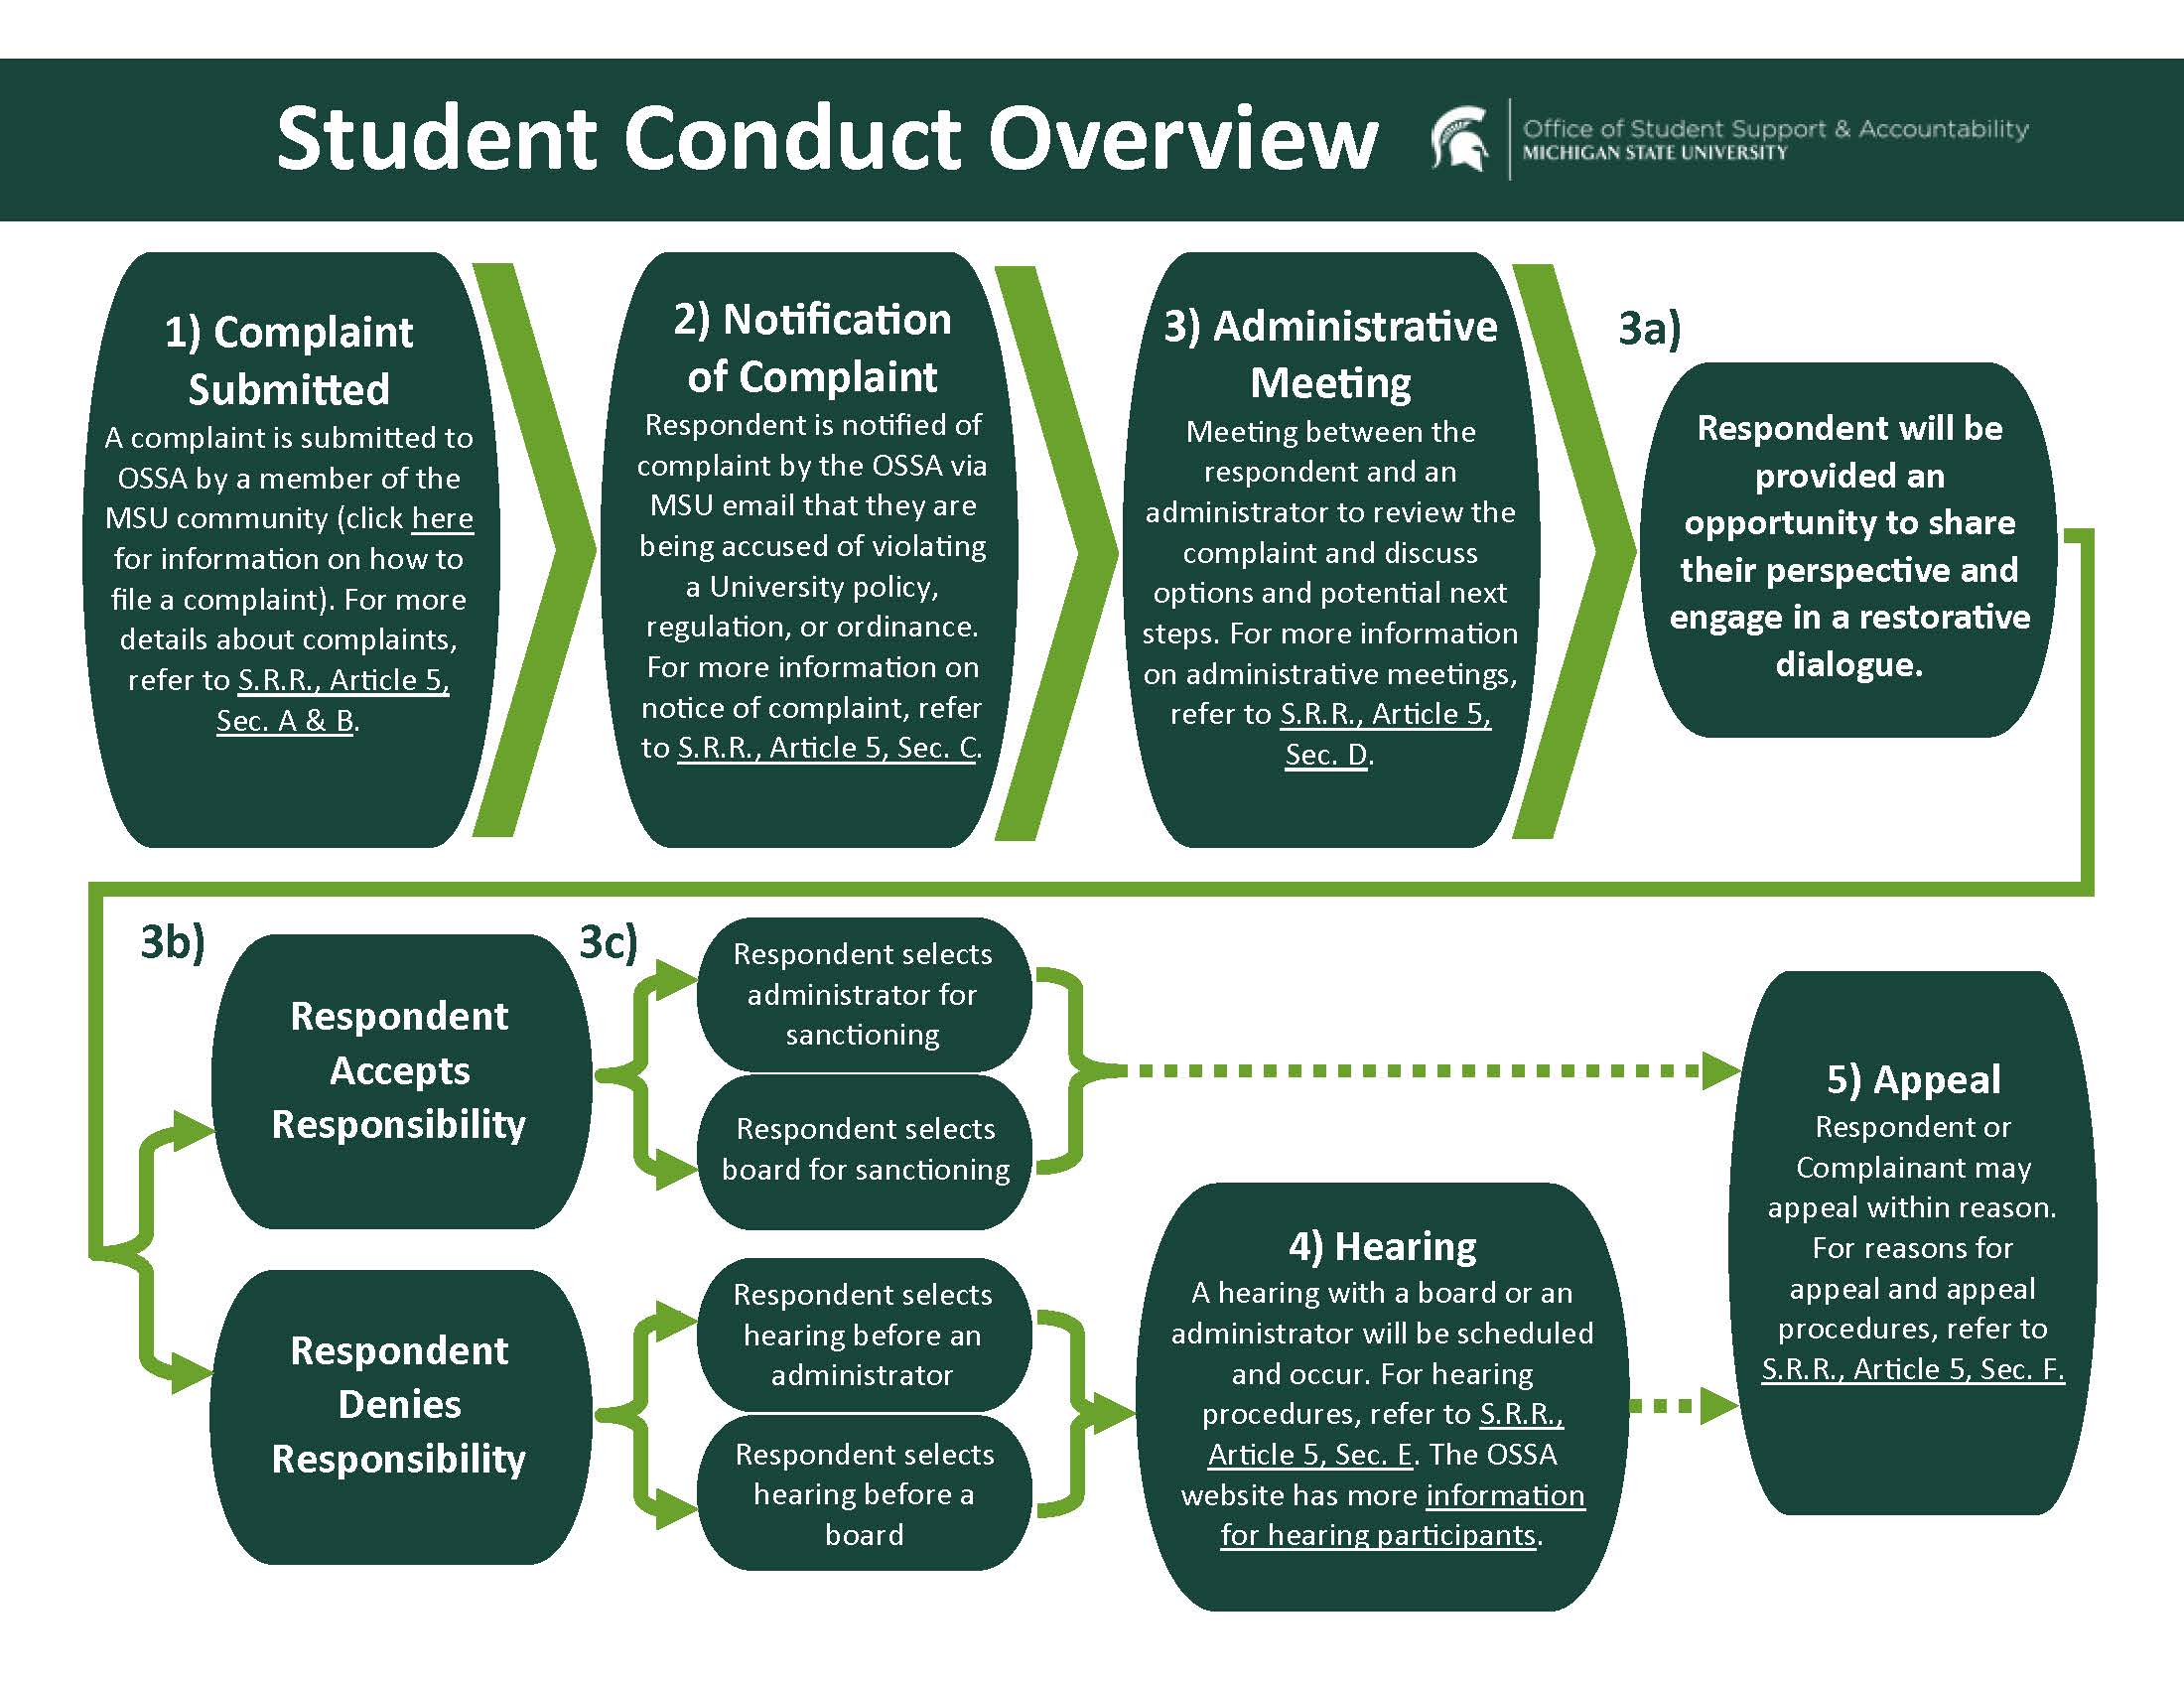 Office of Student Support and Accountability Flowchart Student Conduct Process